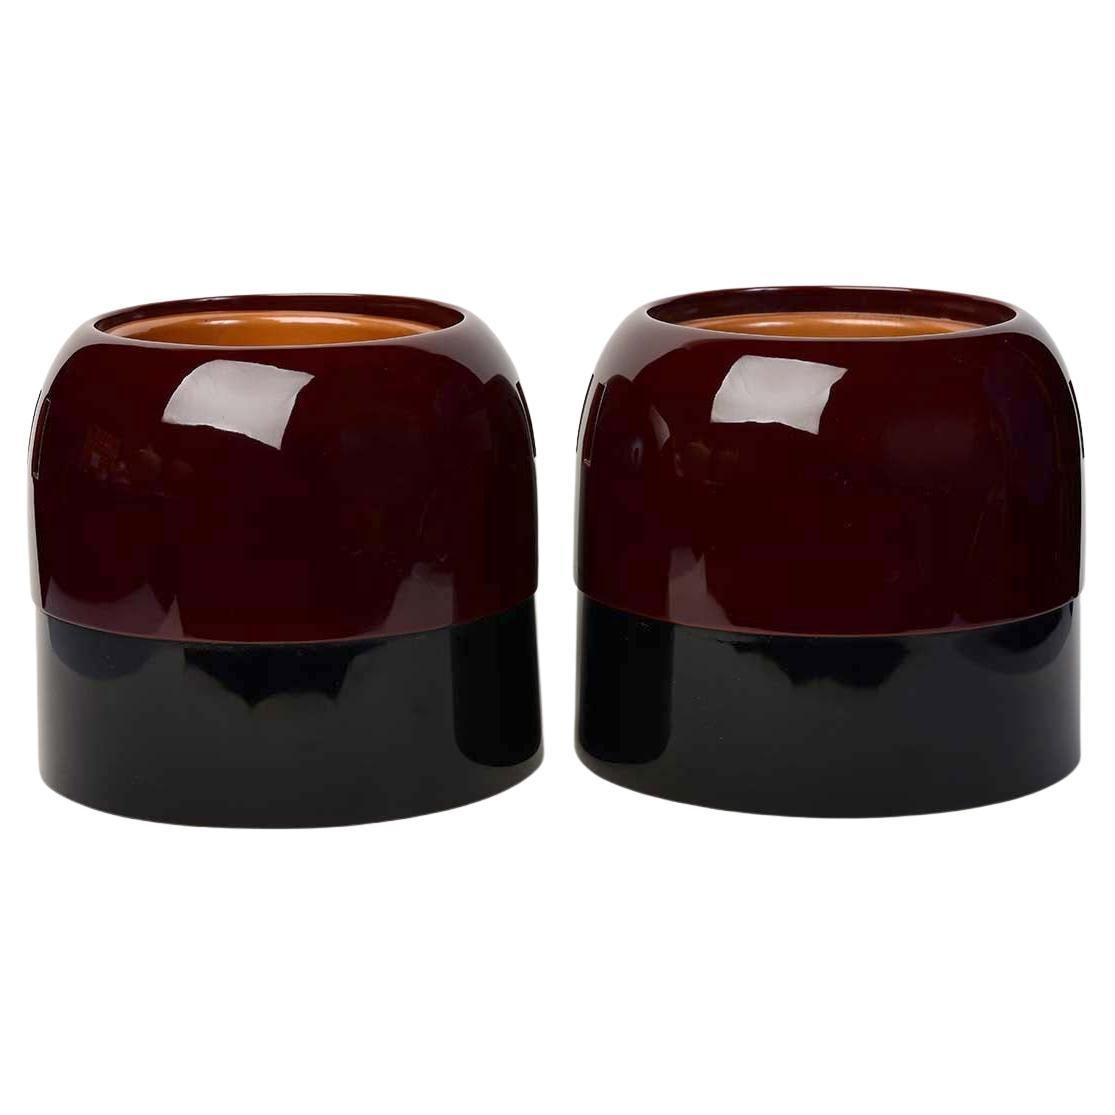 Mid-20th Century, Showa, a Pair of Japanese Lacquered Pots 'Hibachi' For Sale